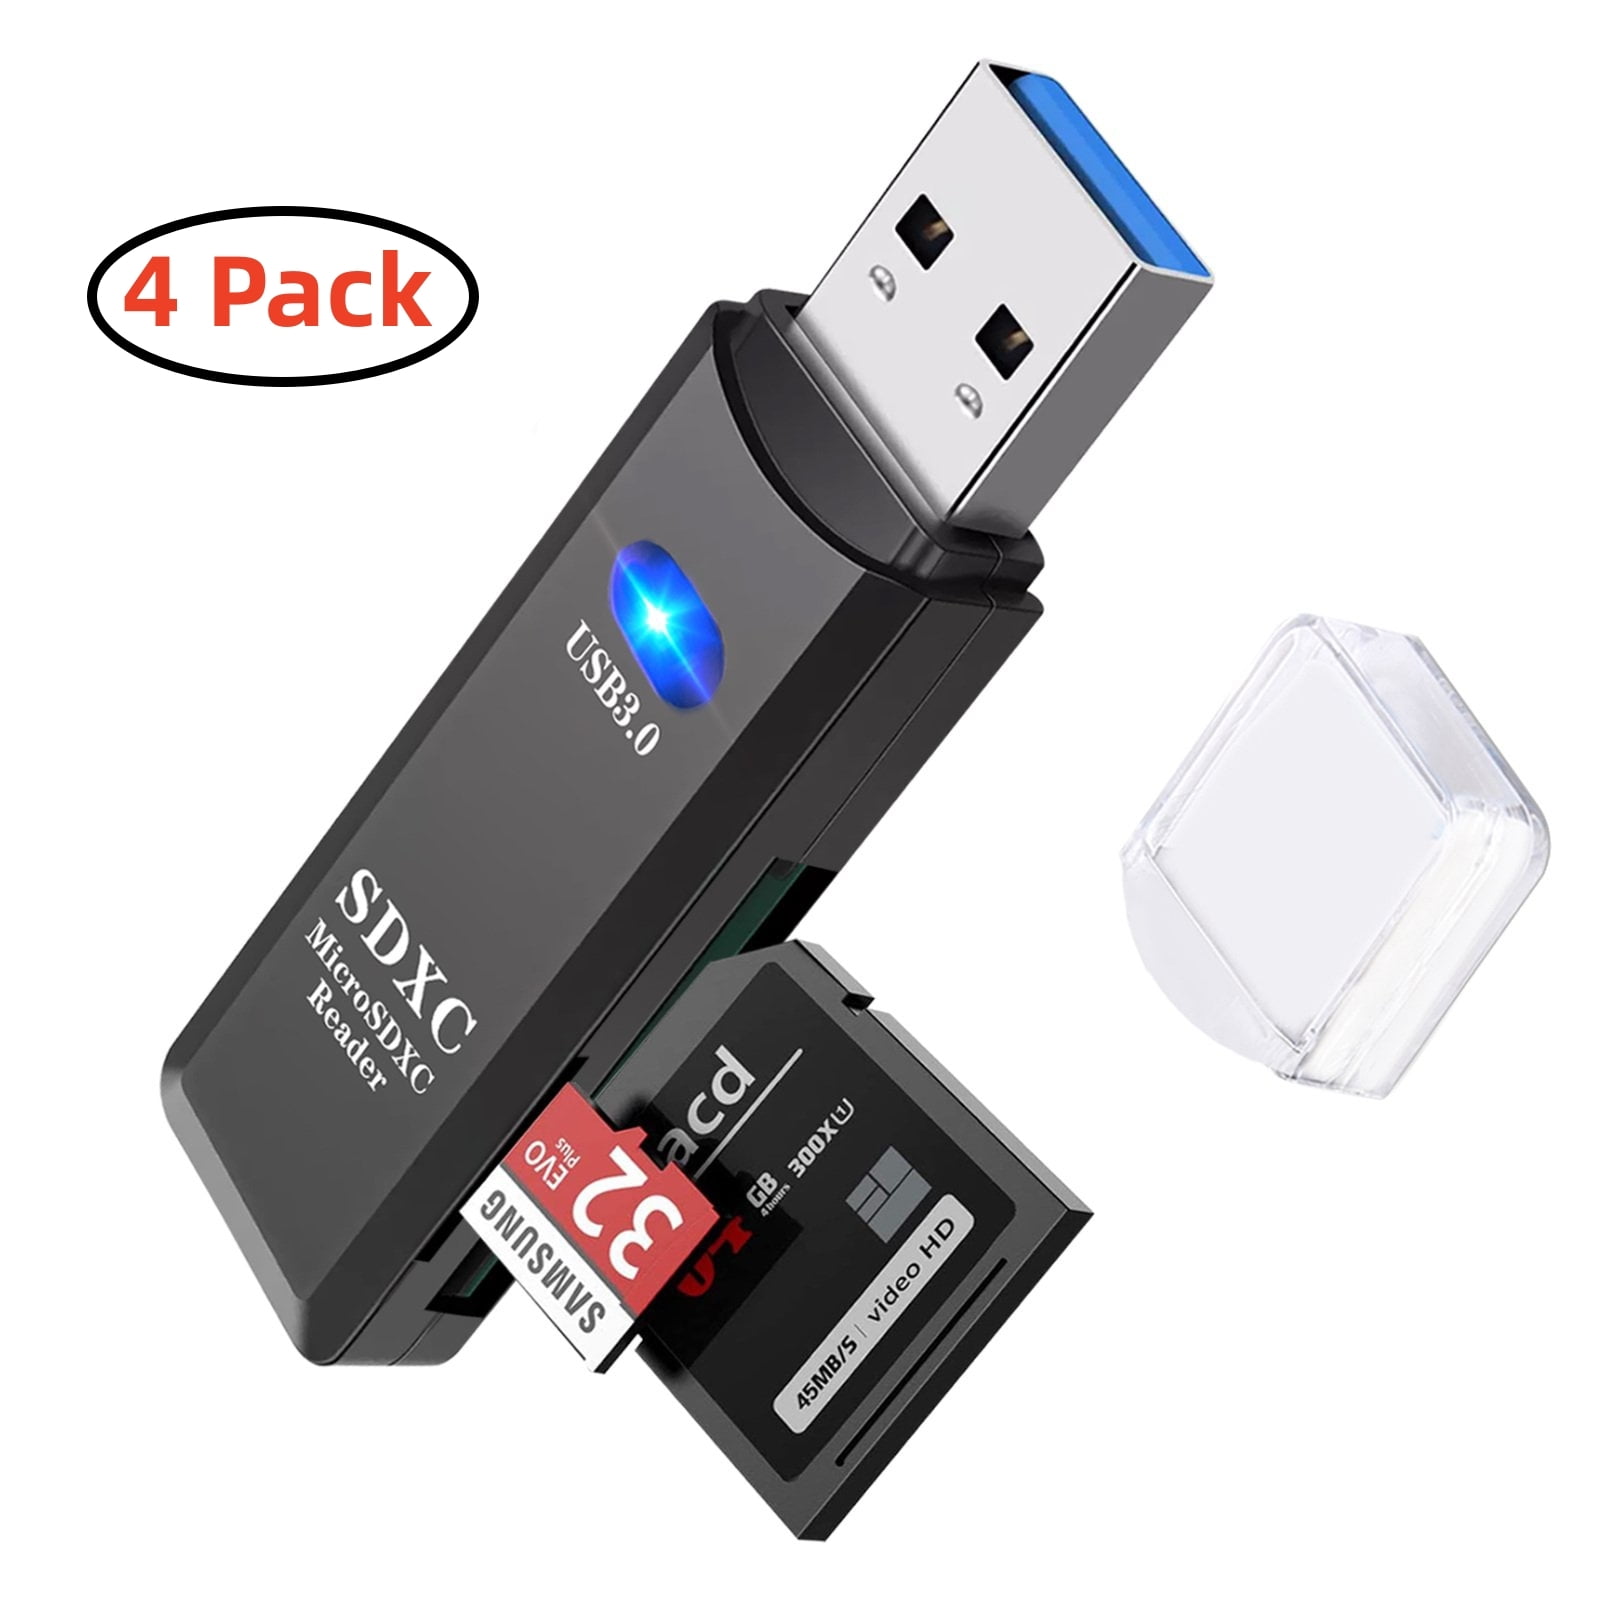 4 Pack USB 3.0 Multi-function SD Memory Card Reader for SDHC SDXC MMC 